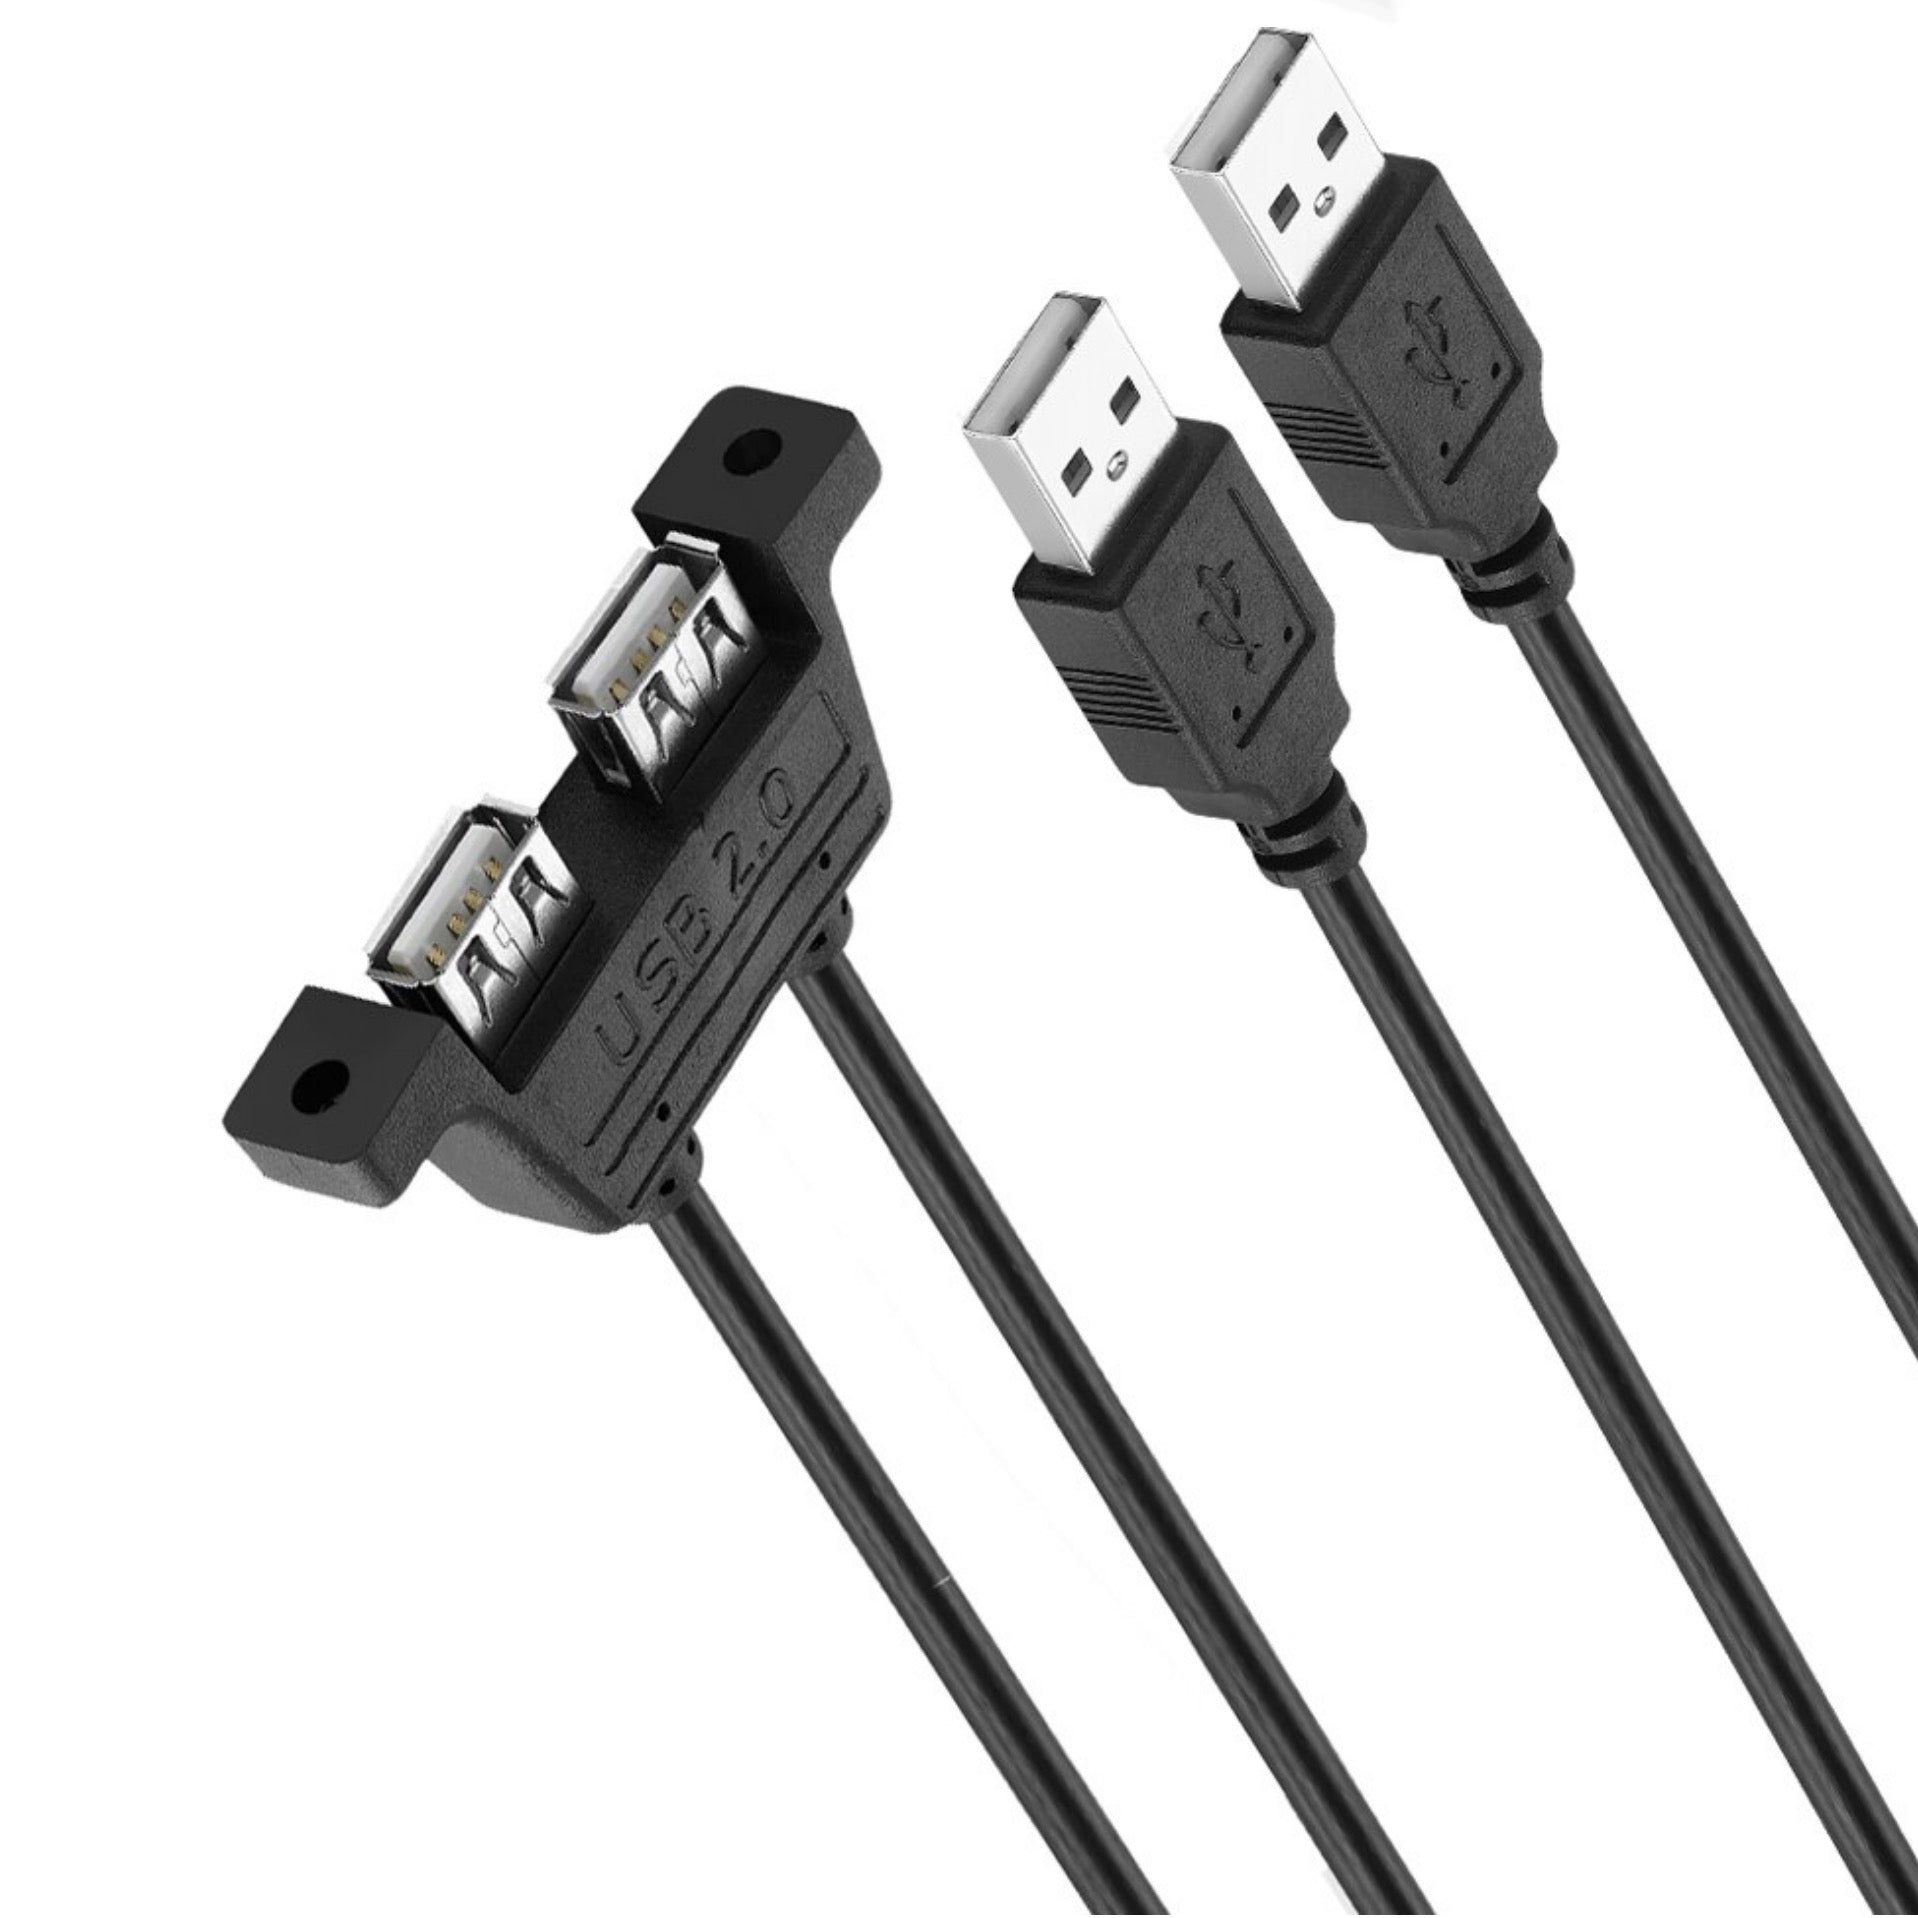 Dual USB 2.0 Type A Male to Dual USB 2.0 Female Panel Mount Extension Cable